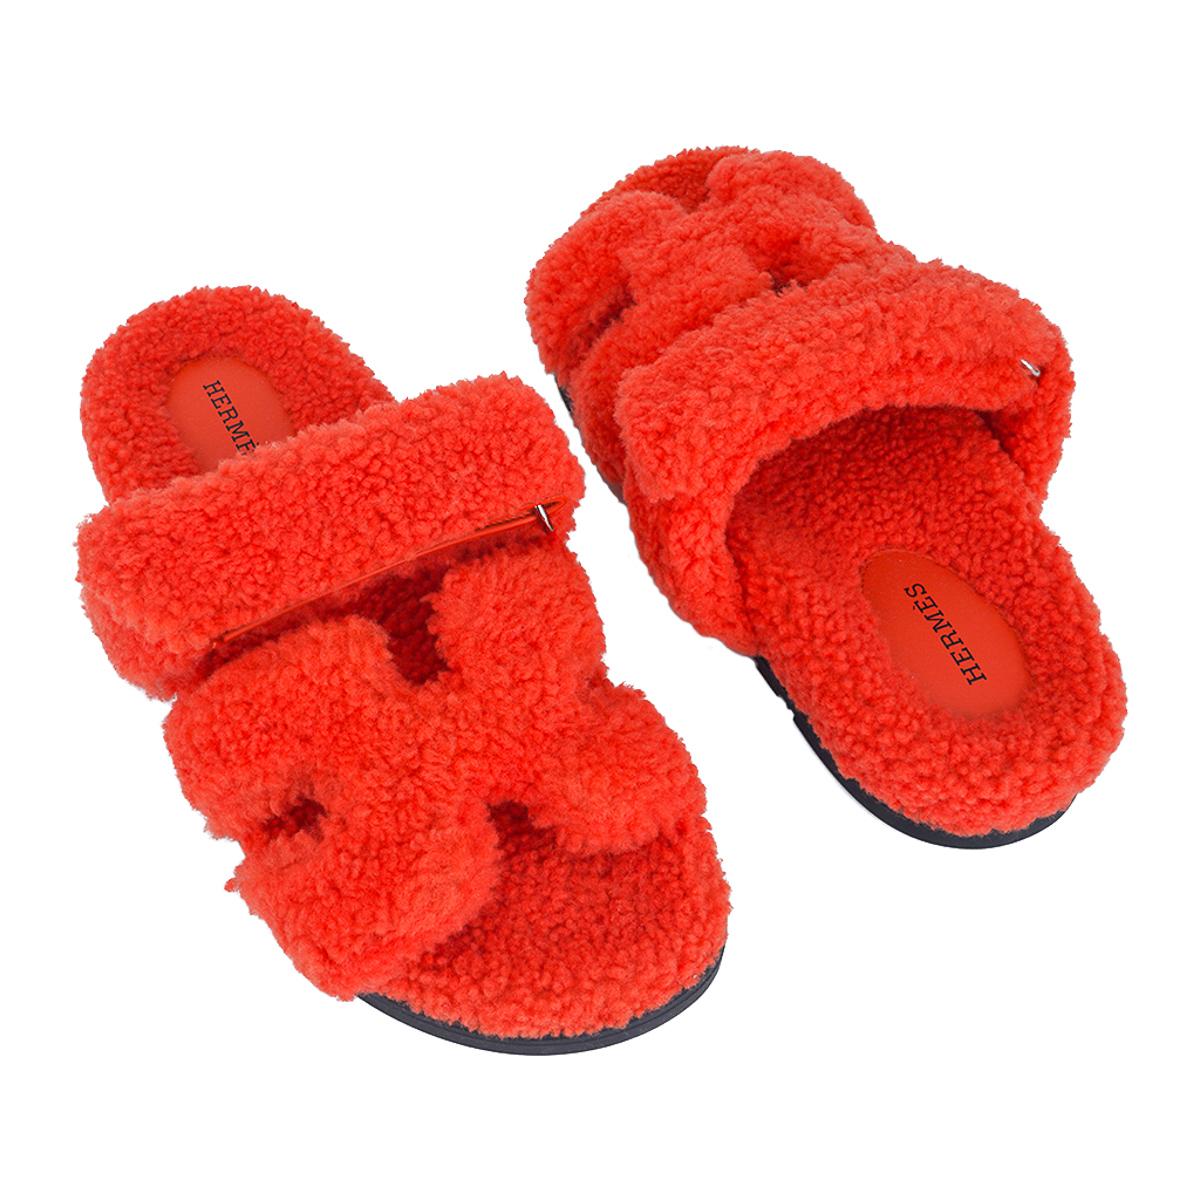 Mightychic offers a pair of limited edition Hermes Chypre Sandals featured in Orange Shearling.
Techno-sandal with anatomical rubber sole for heavenly comfort in insulating woolskin shearling.
Strap across foot is adjustable with velcro